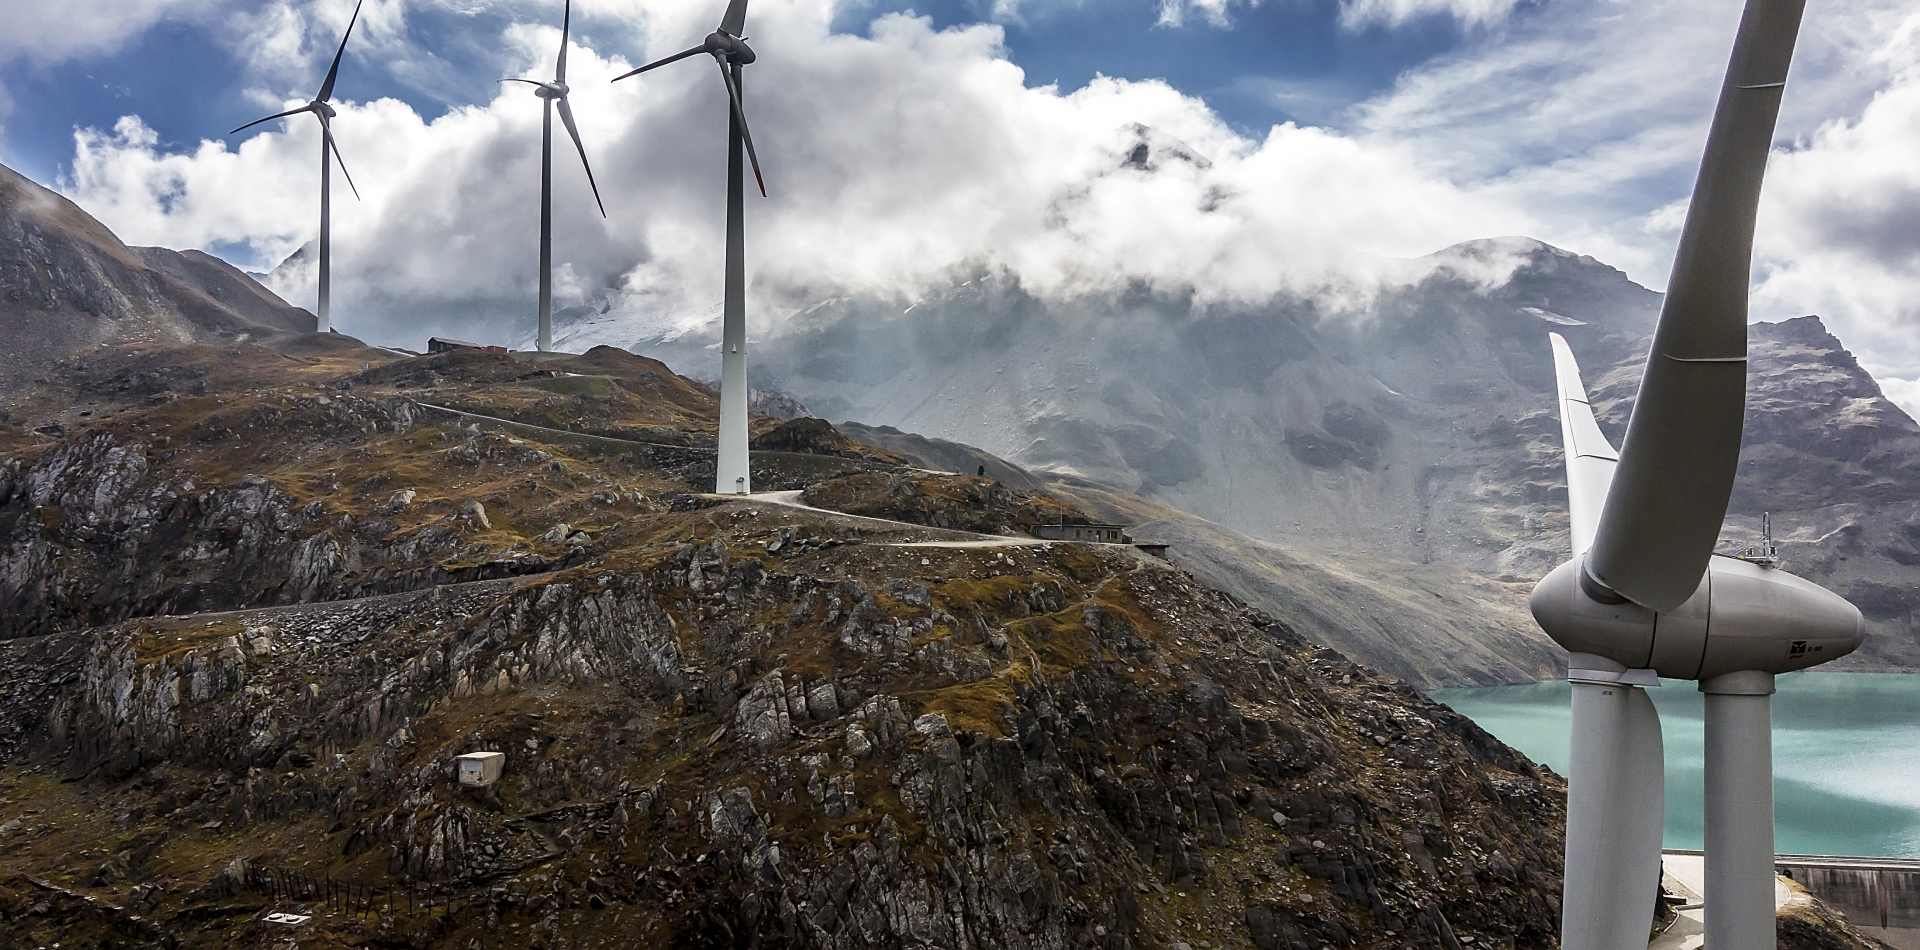 Wind turbines at the site of the highest wind park in Europe are pictured at the Griessee, near the Nufenenpass in the Swiss south Alpes, Valais, Switzerland, on September 23, 2016. The four wind turbines of this wind park were developed by the company SwissWinds GmbH and are inaugurated this Friday, September 30 2016. (KEYSTONE/Olivier Maire) SCHWEIZ NUFENENPASS WINDPARK